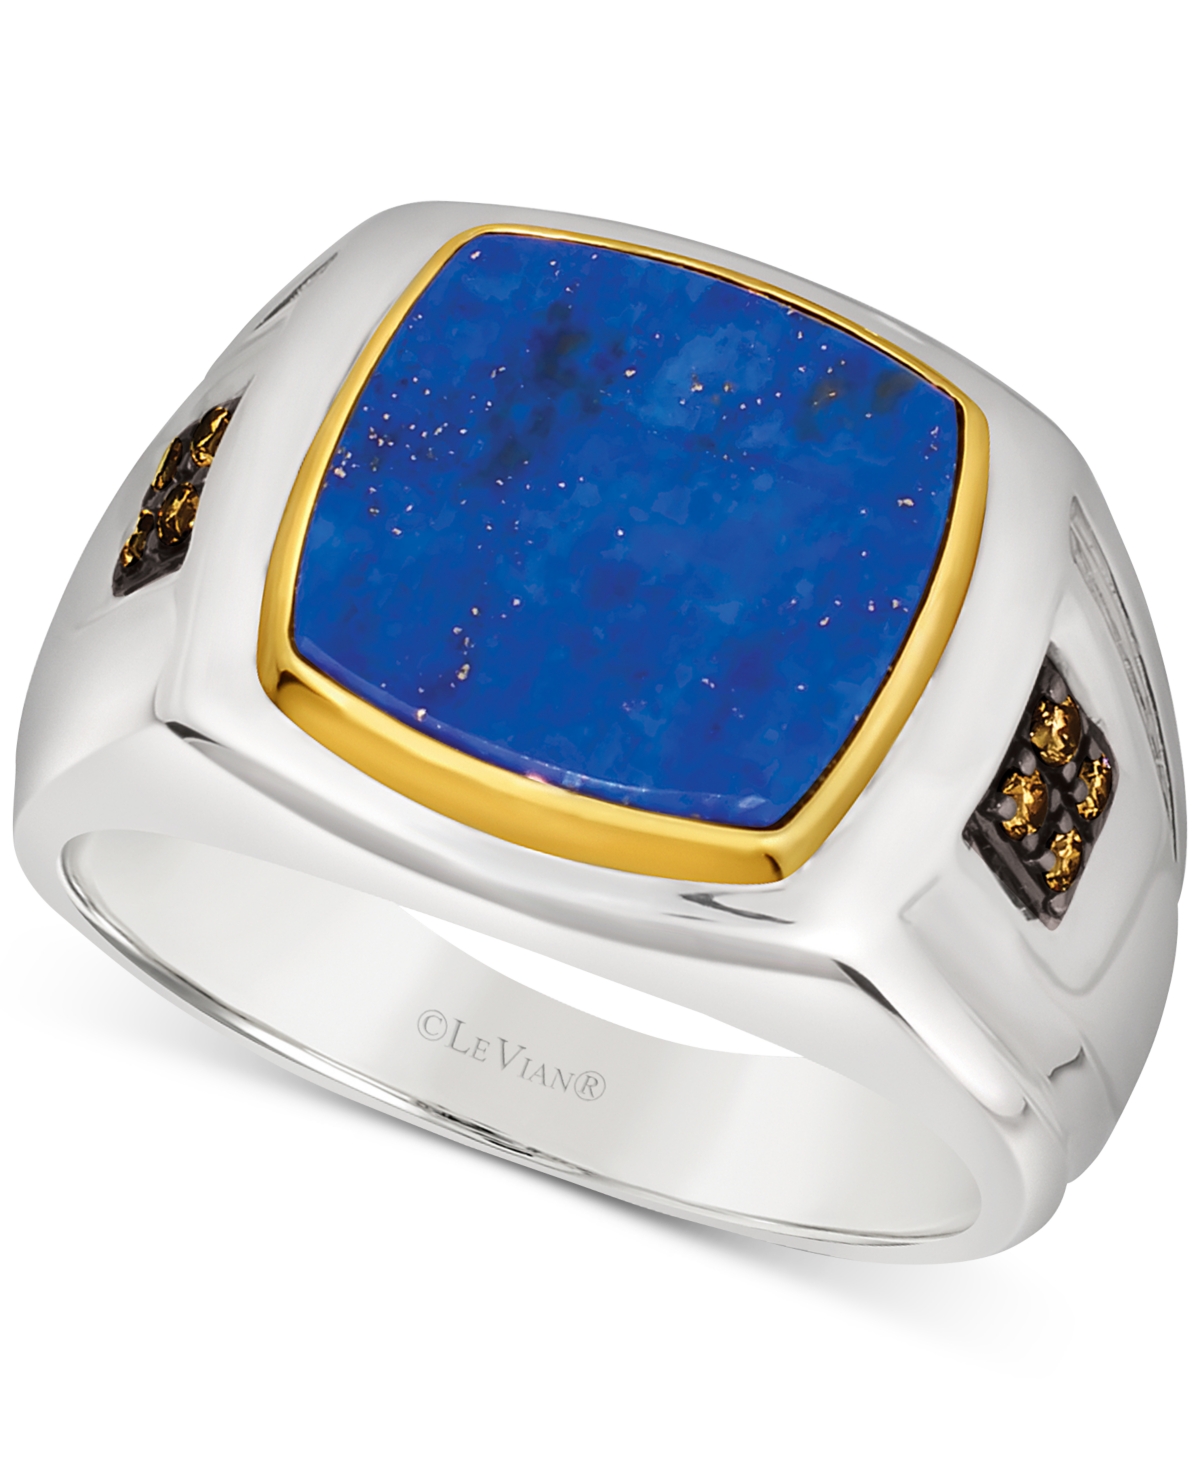 Men's Lapis Lazuli & Chocolate Diamond (1/10 ct. t.w.) Ring in Sterling Silver & 14k Gold - Silver